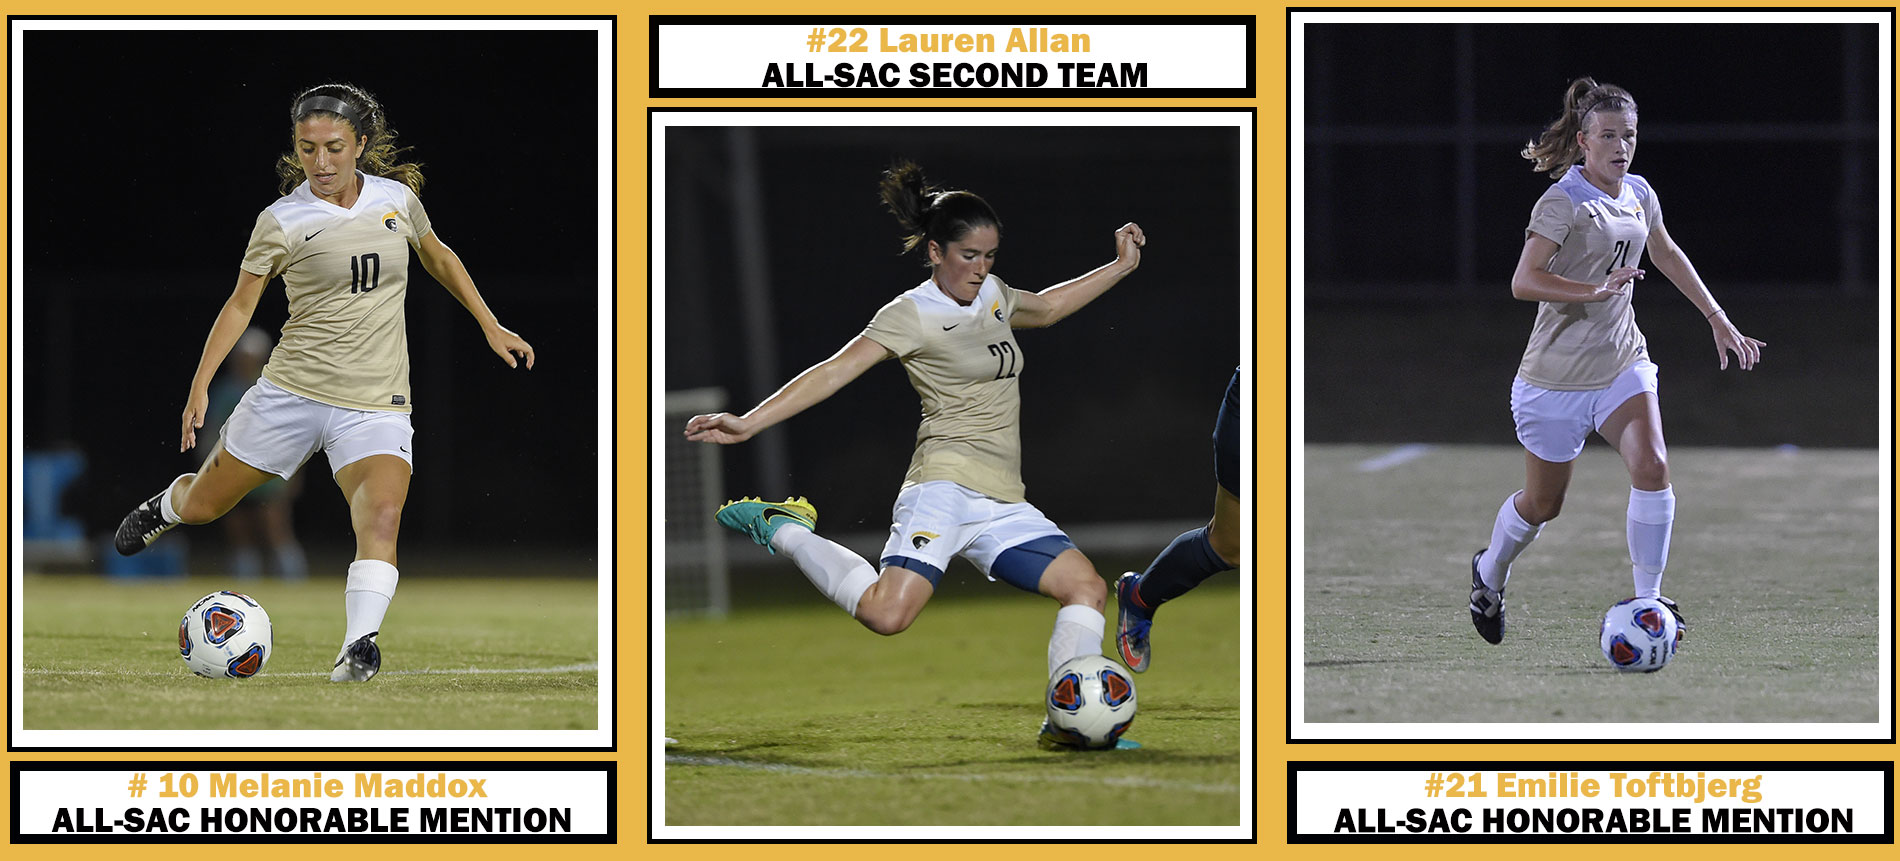 Three Trojans Honored by the South Atlantic Conference